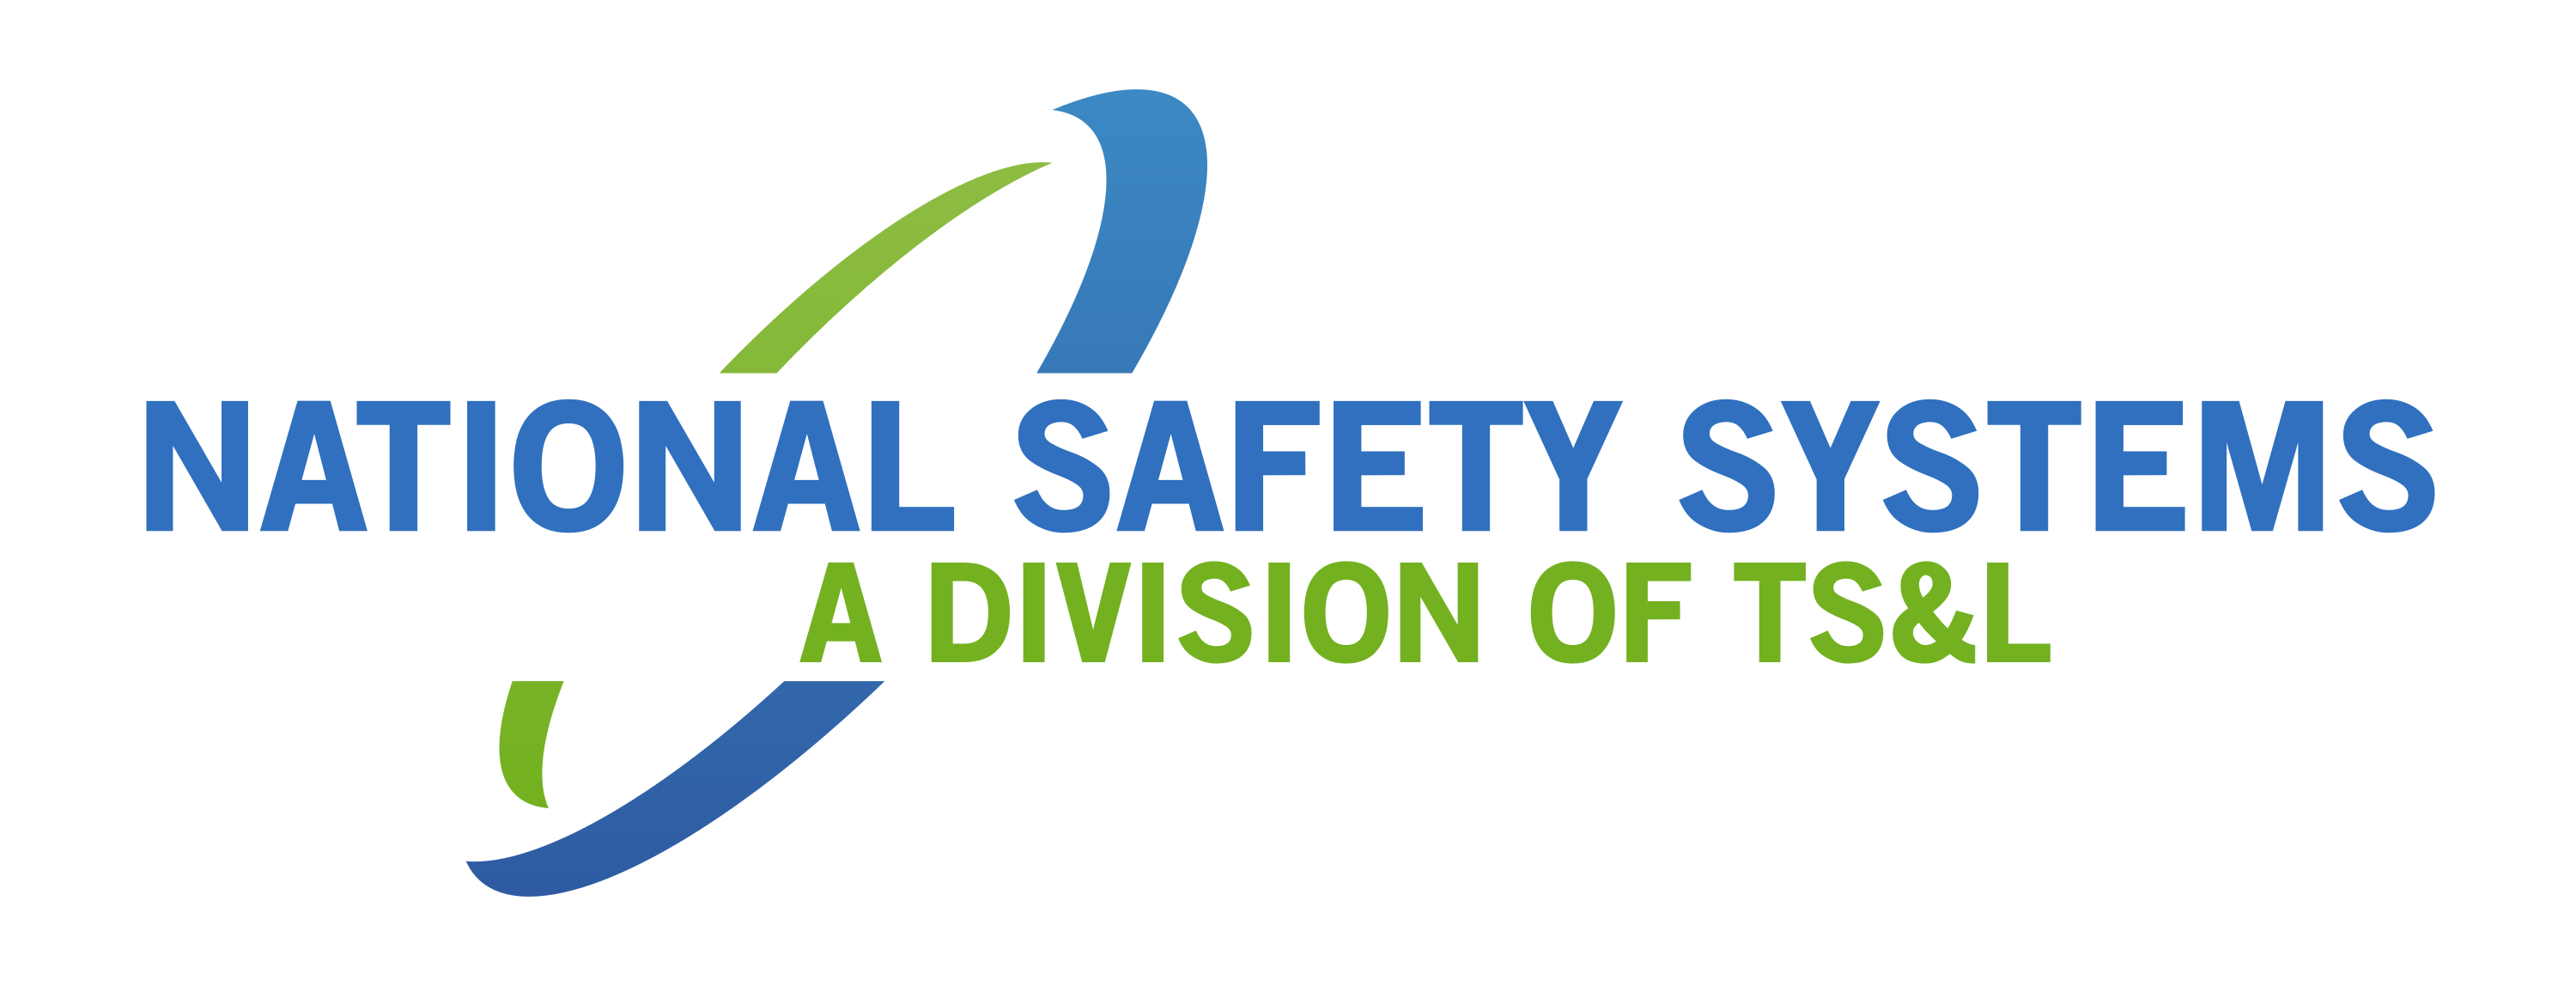 National Safety Systems 